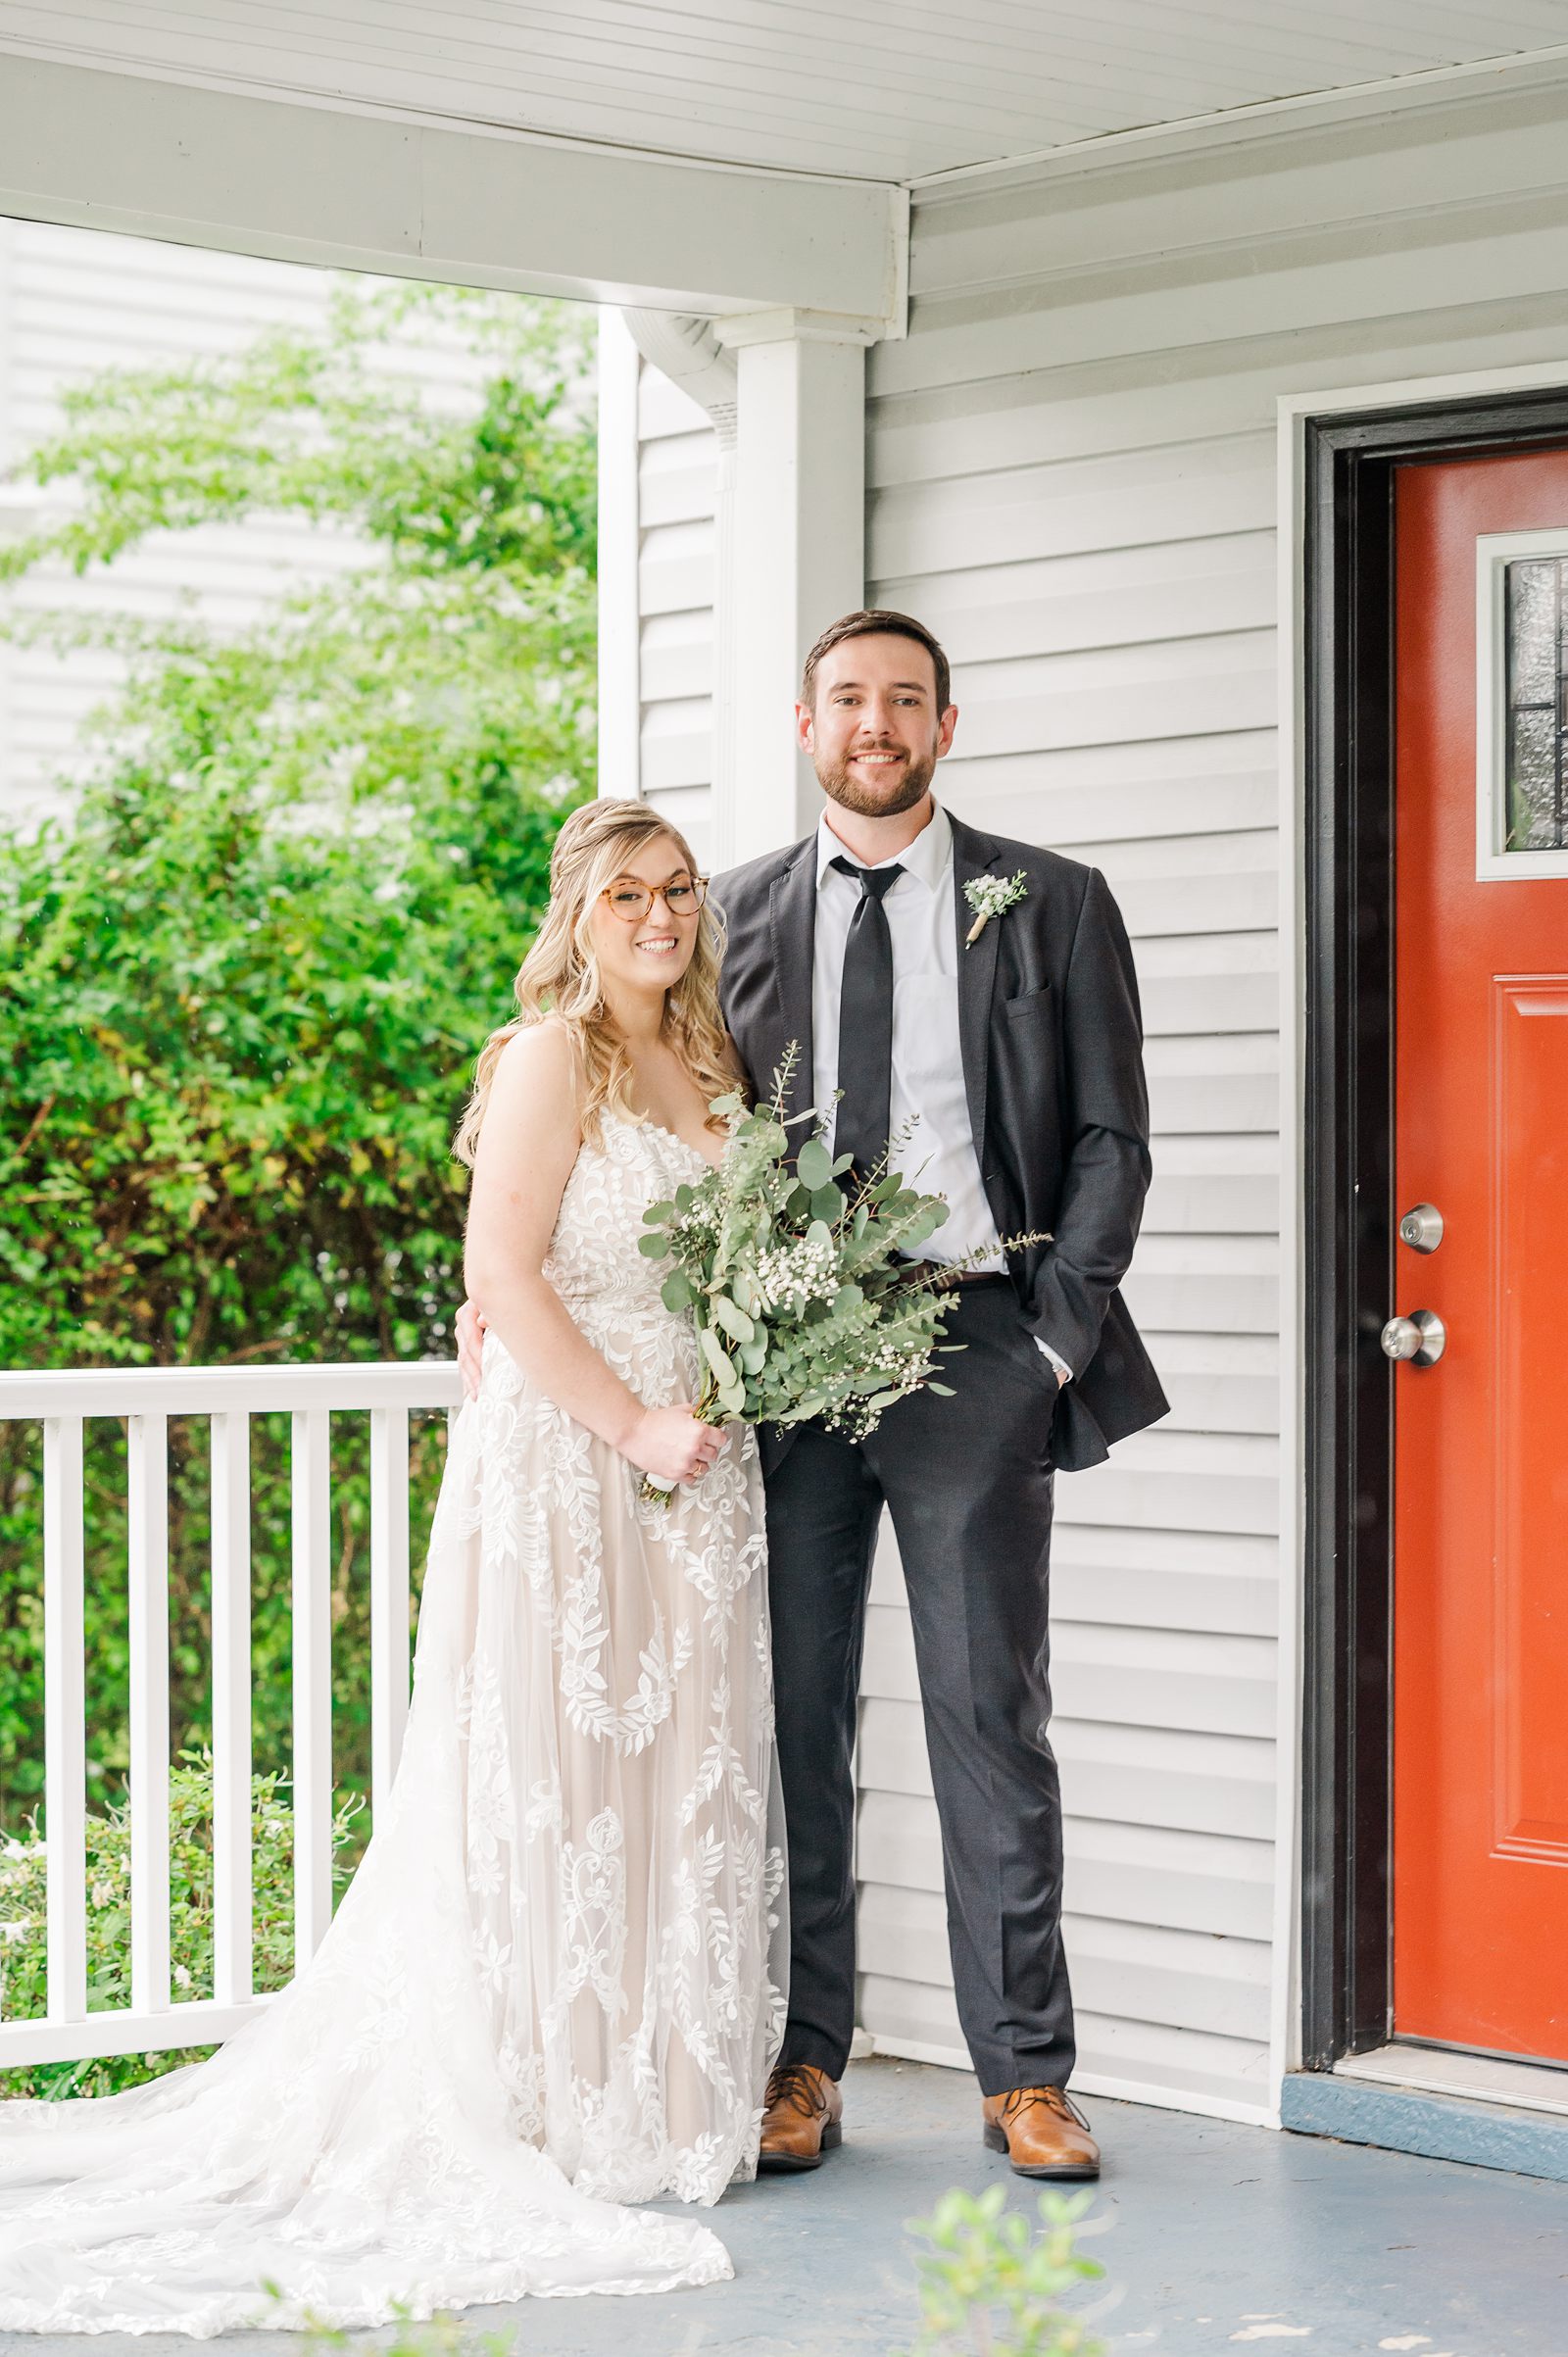 Rainy Bride and Groom First Look at Intimate Spring Richmond Wedding, by Virginia Wedding Photographer 